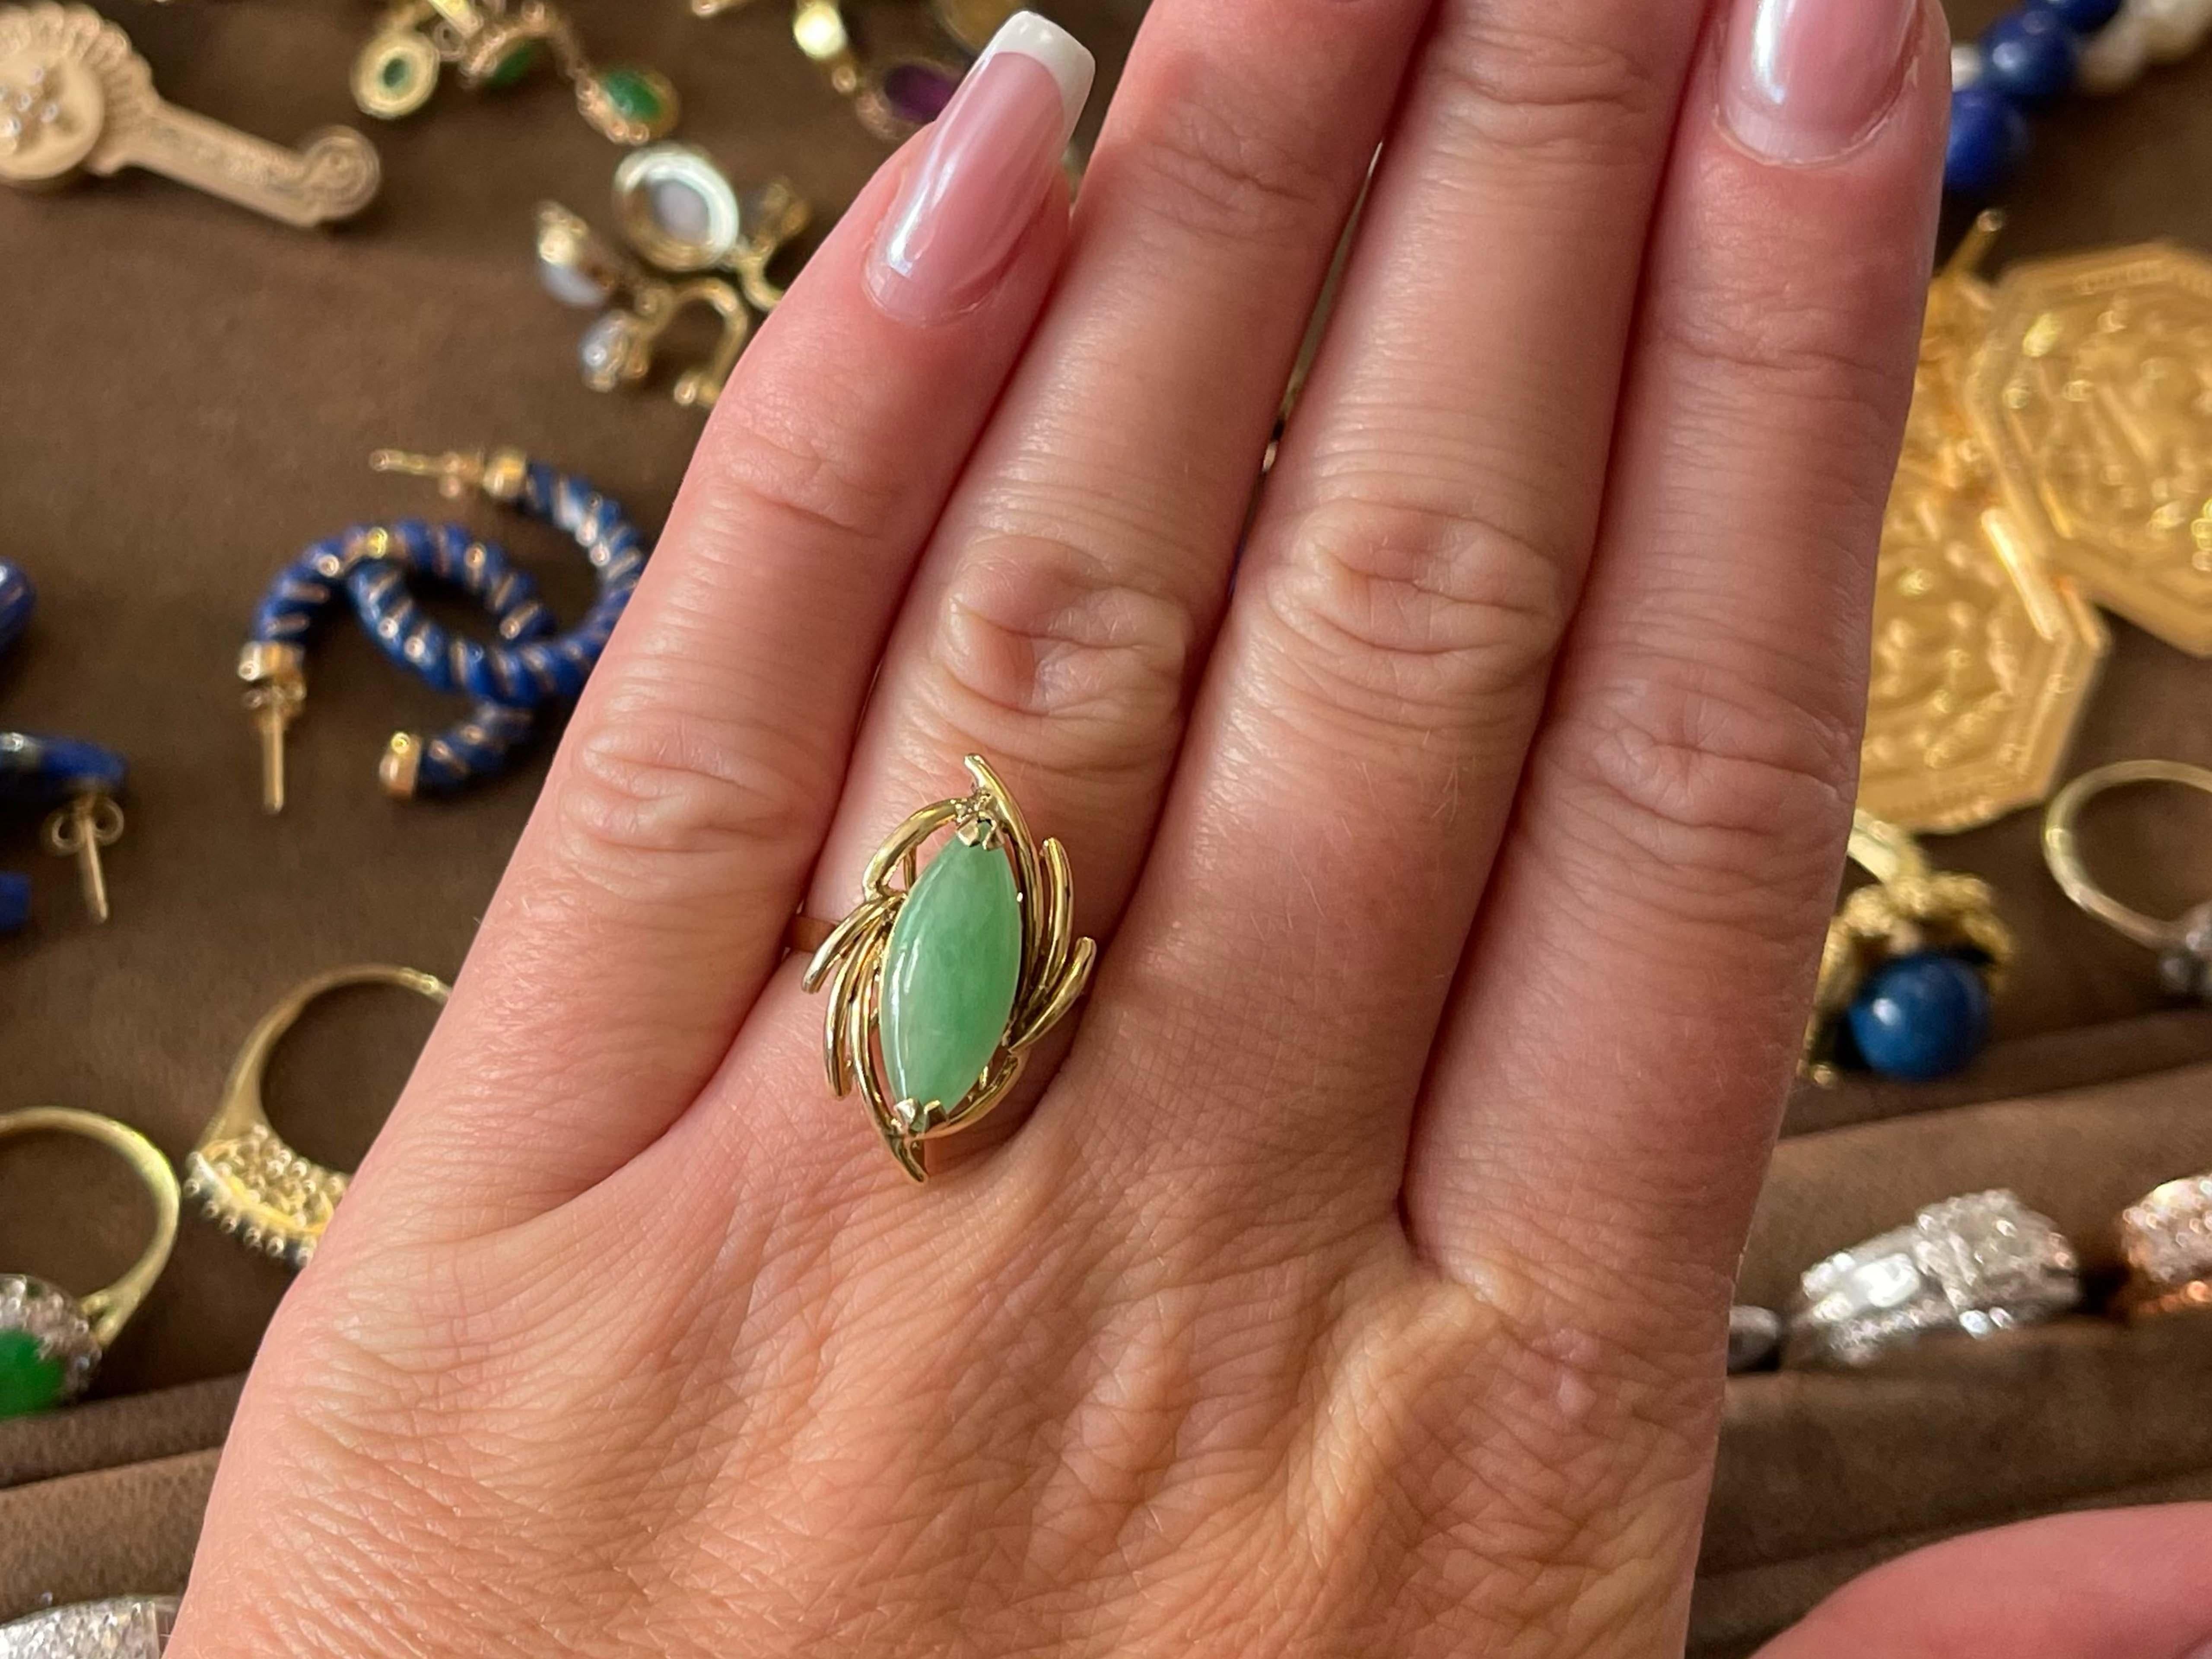 Item Specifications:

Metal: 14K Yellow Gold 

Style: Statement Ring

Ring Size: 7 (resizing available for a fee)

Total Weight: 3.3 Grams

Gemstone: Jadeite Jade

Condition: Vintage, Excellent

Stamped: 